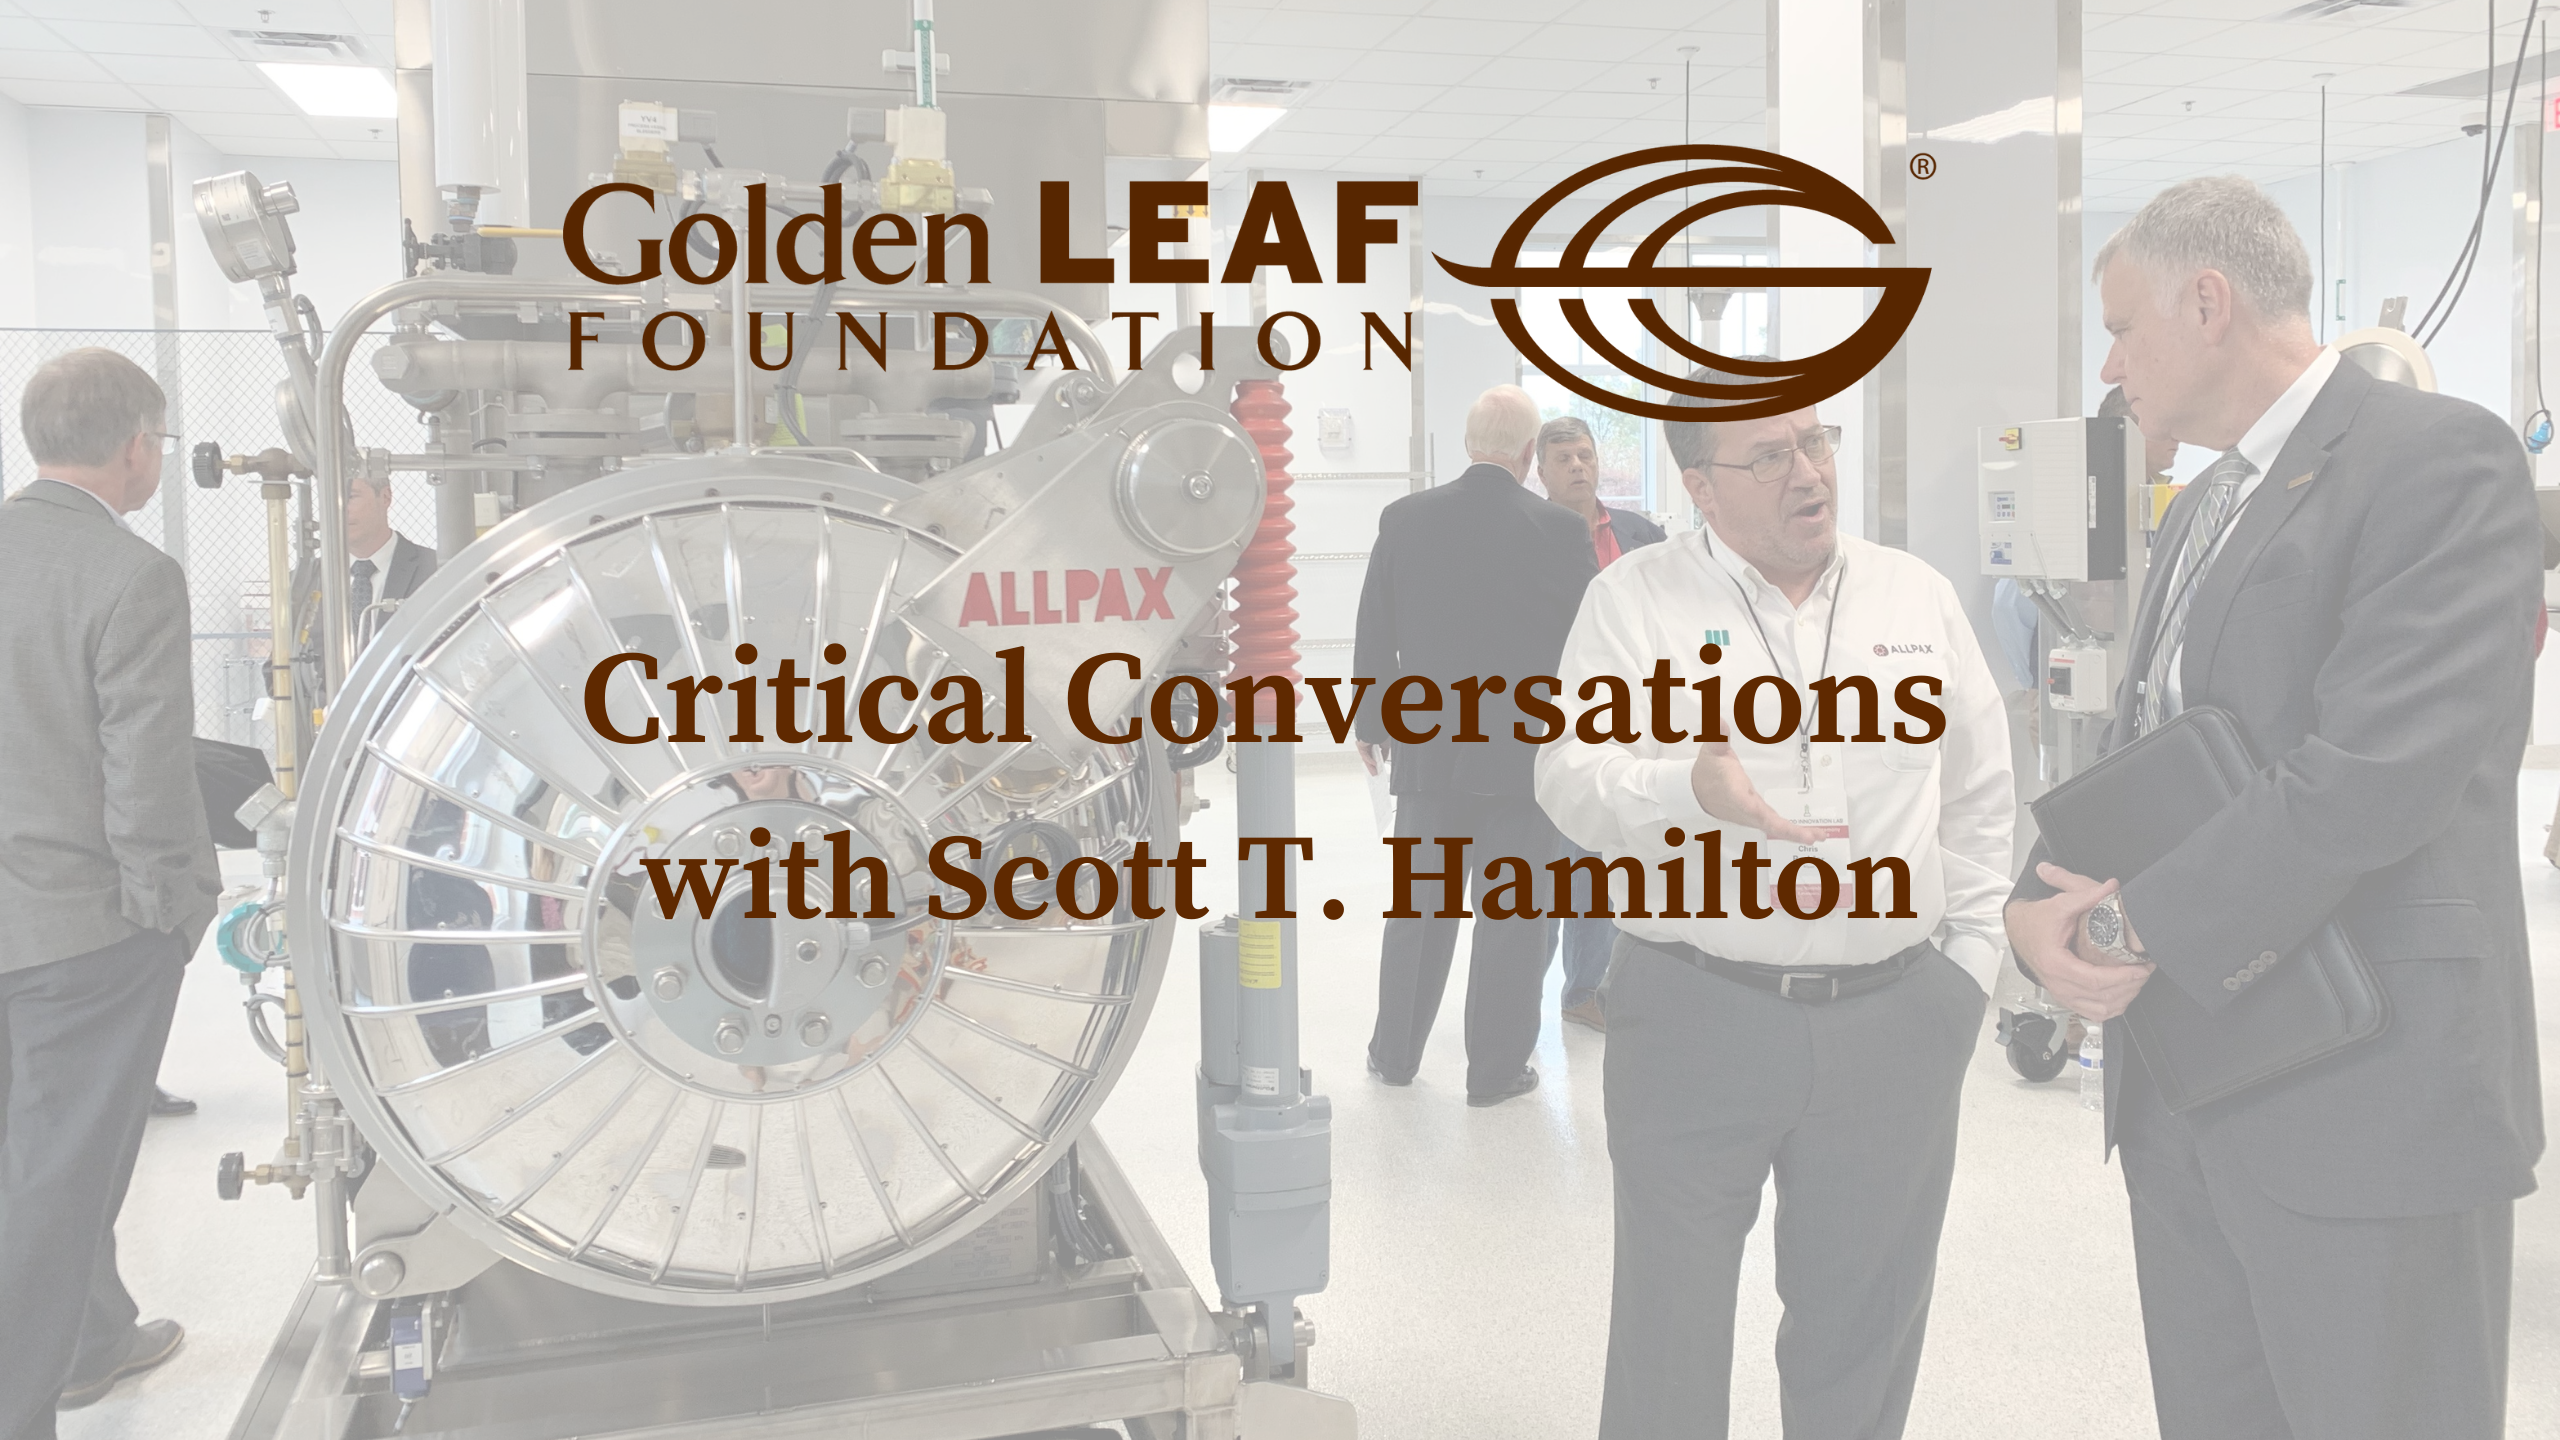 Critical Conversations with Scott T. Hamilton featuring Byron Hicks, State Director of the Small Business and Technology Development Center